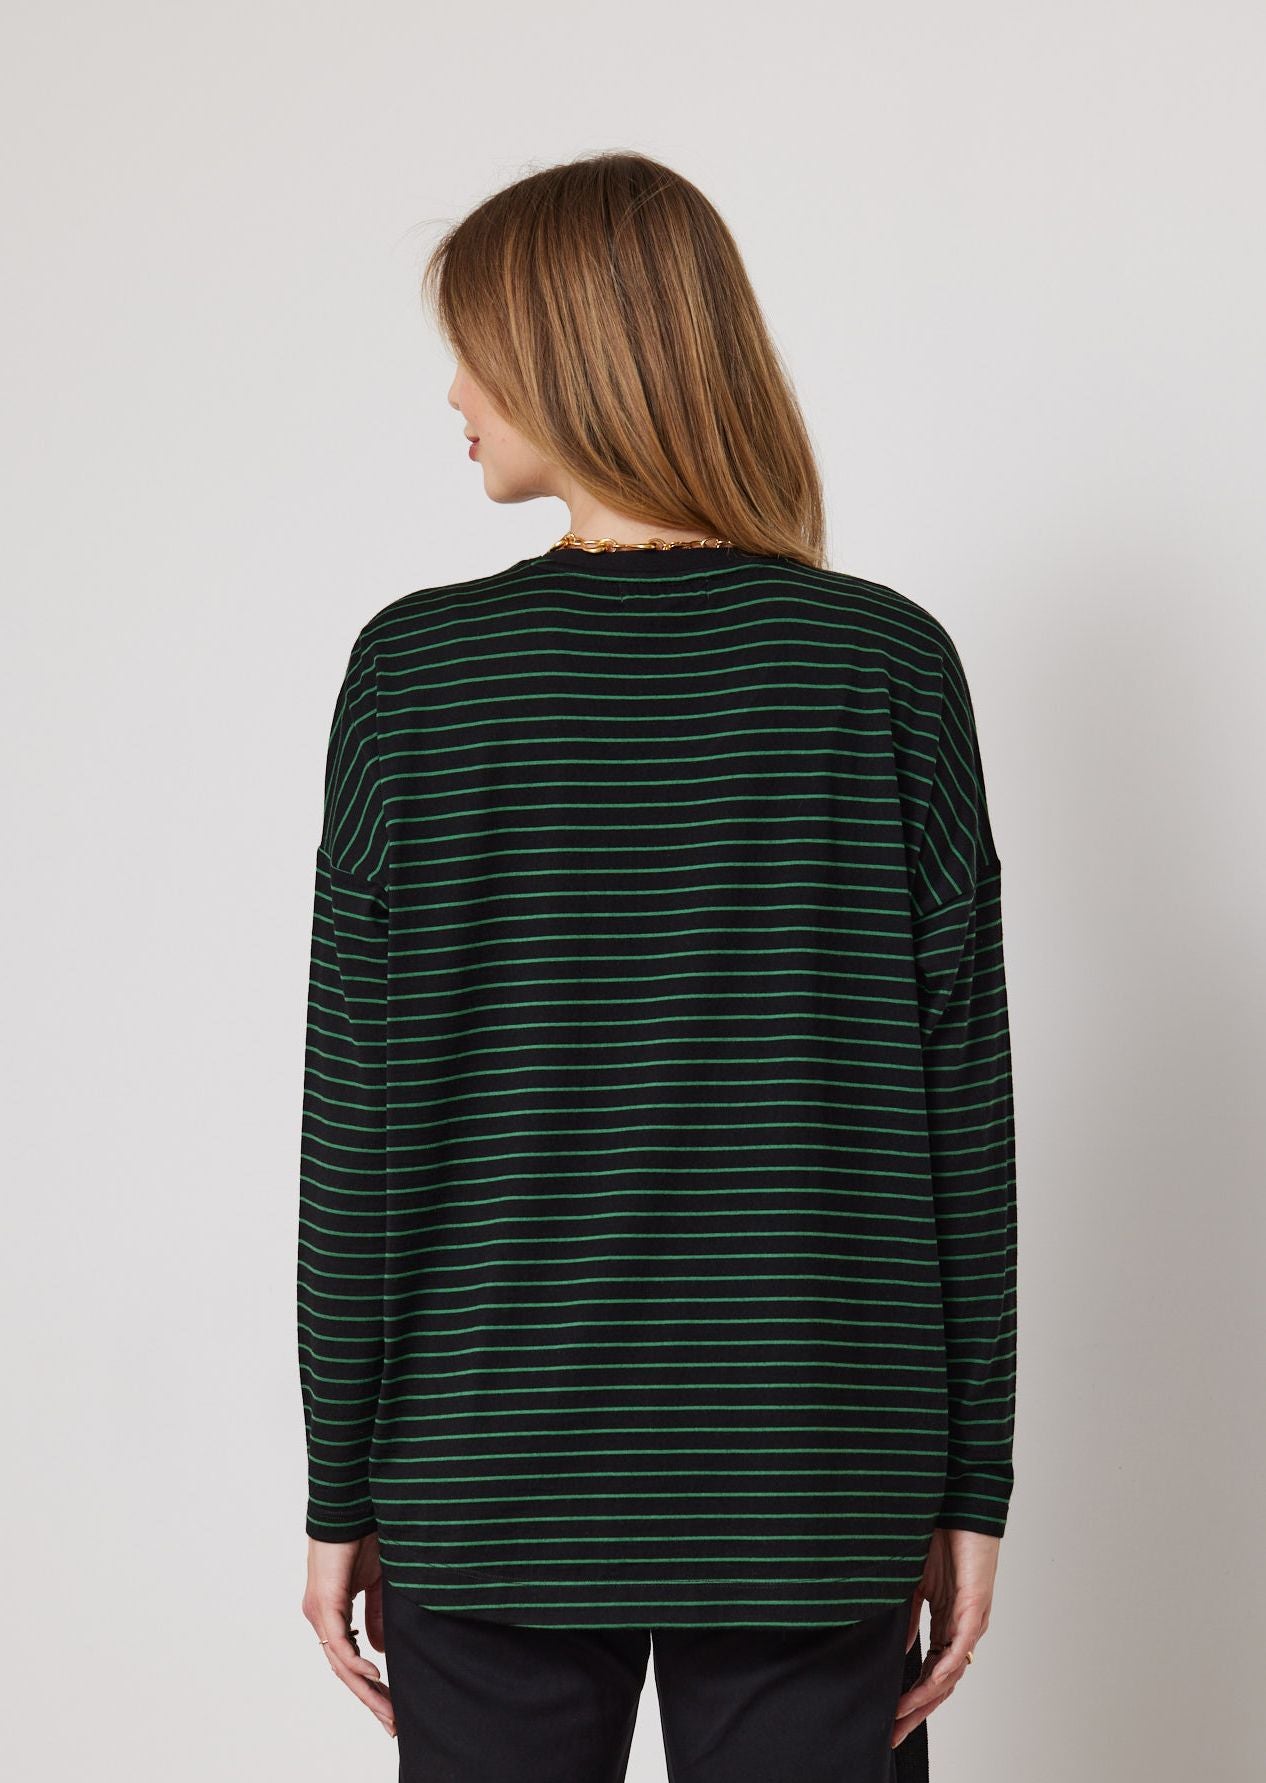 DUO ALODIE SPLICE TOP - FOREST GREEN /BLACK STRIPE - THE VOGUE STORE